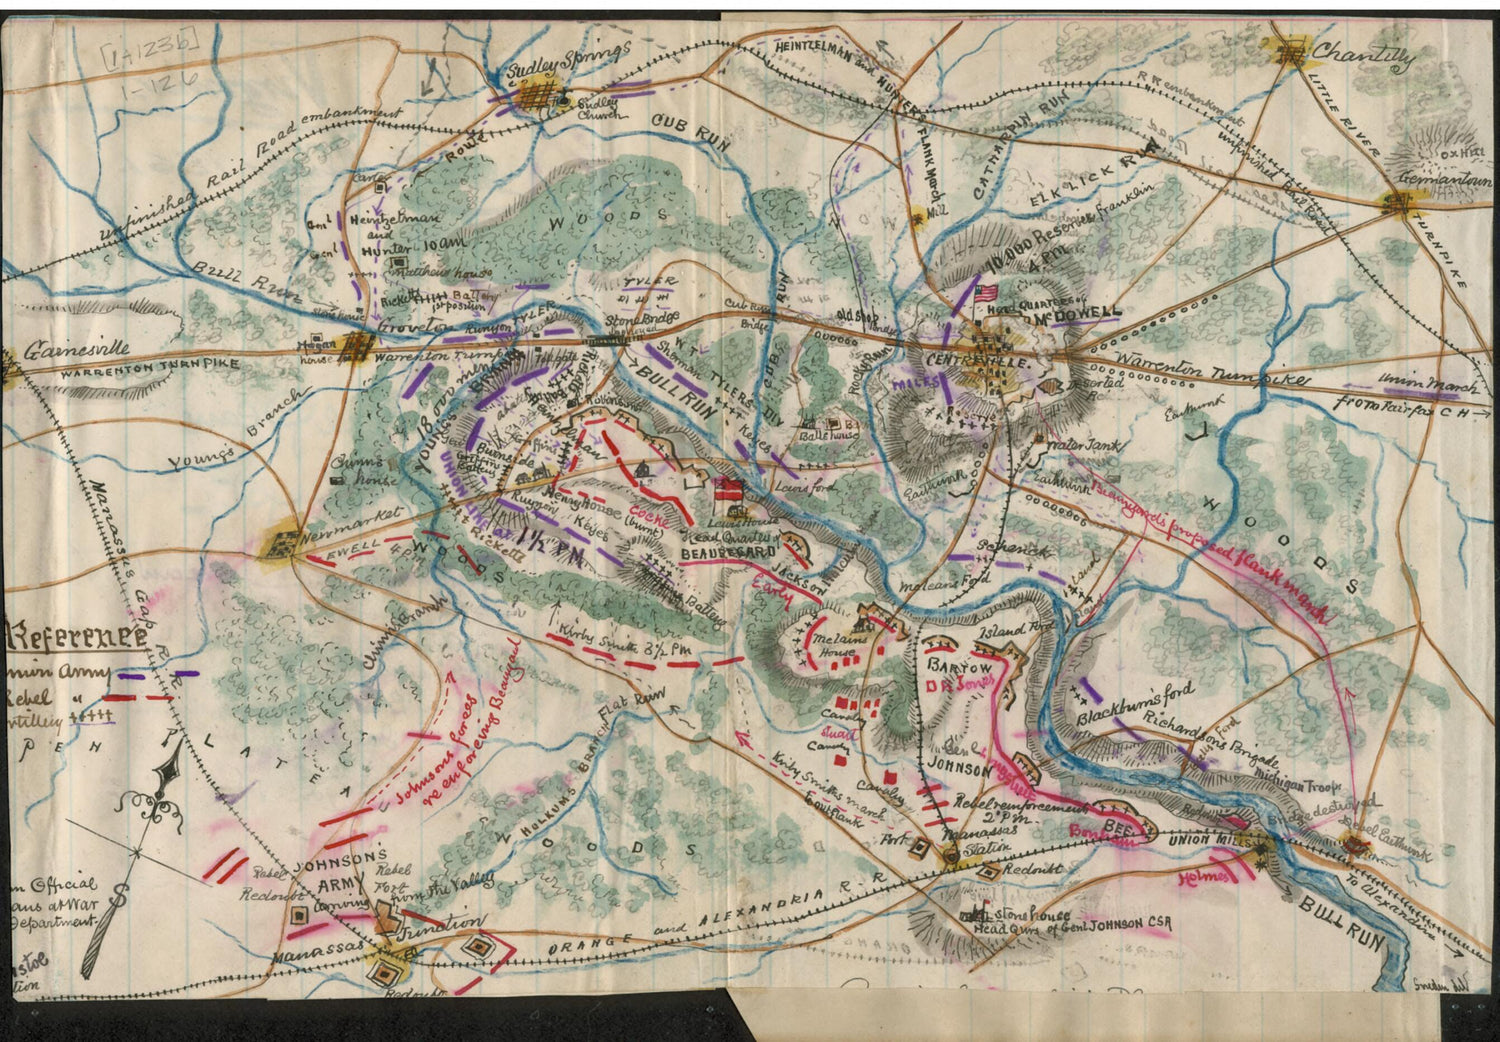 This old map of Map of the First Battle of Bull Run from 1861 was created by Robert Knox Sneden in 1861